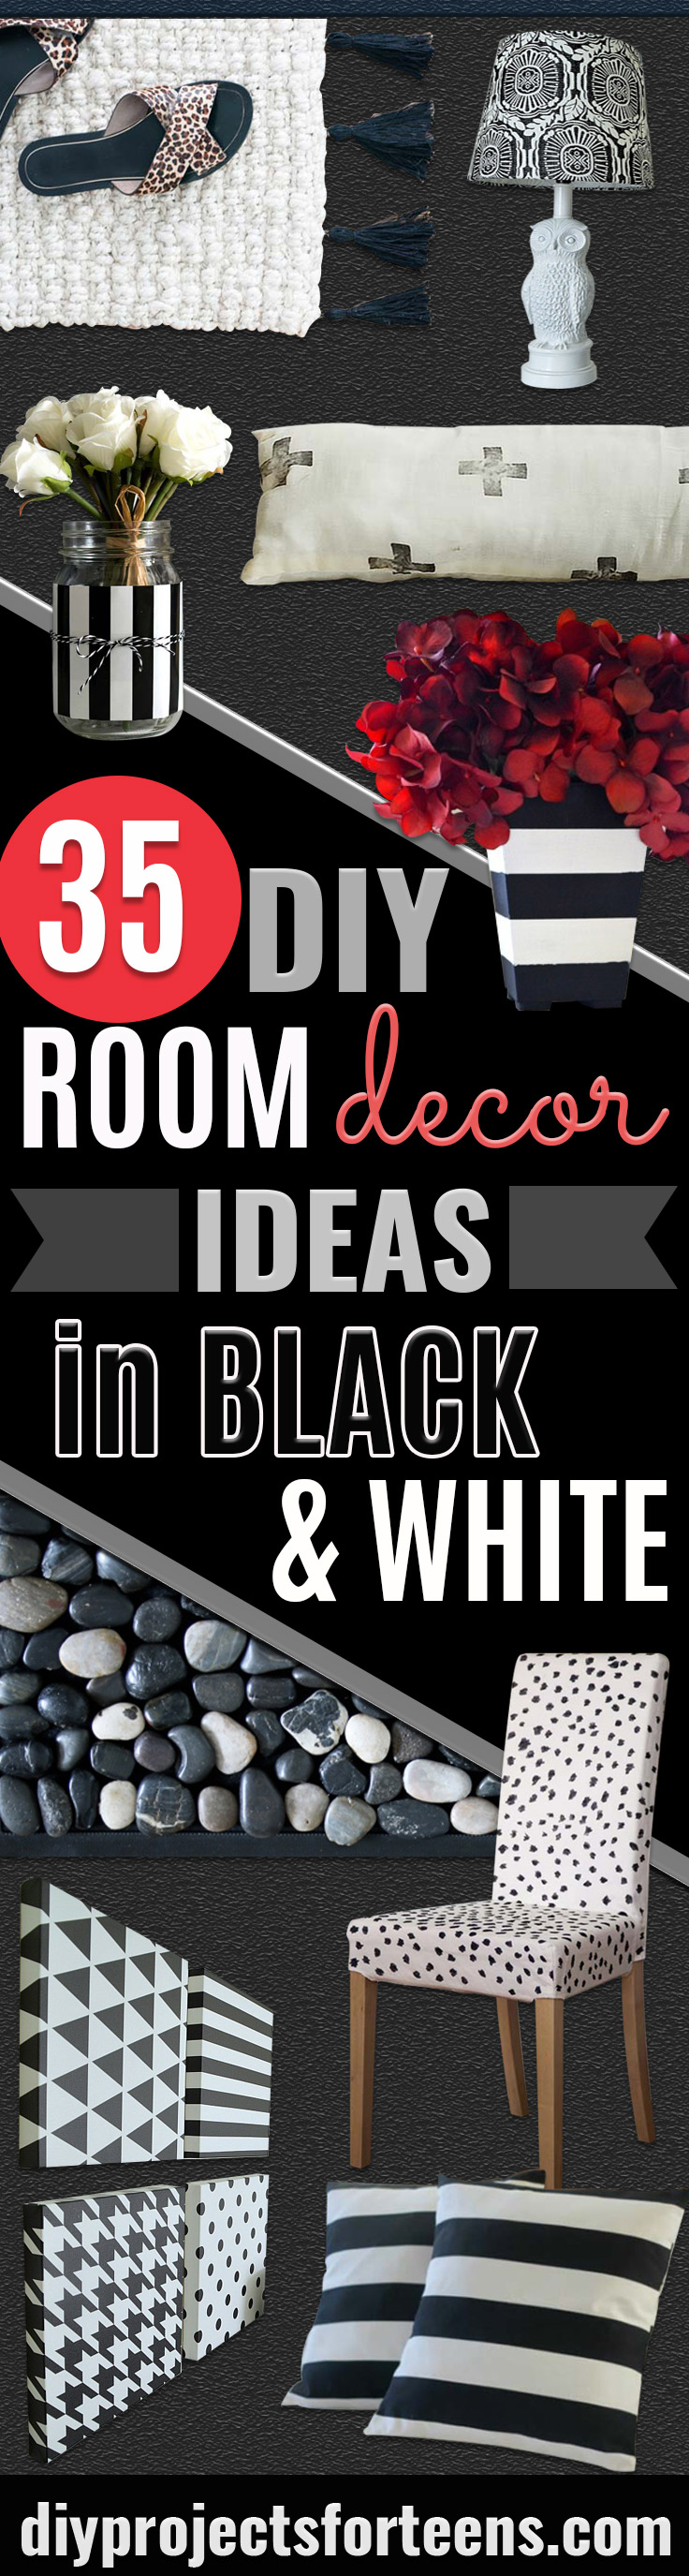 DIY Room Decor Ideas in Black and White - Creative Home Decor and Room Accessories - Cheap and Easy Projects and Crafts for Wall Art, Bedding, Pillows, Rugs and Lighting - Fun Ideas and Projects for Teens, Apartments, Adutls and Teenagers http://diyprojectsforteens.com/diy-decor-black-white